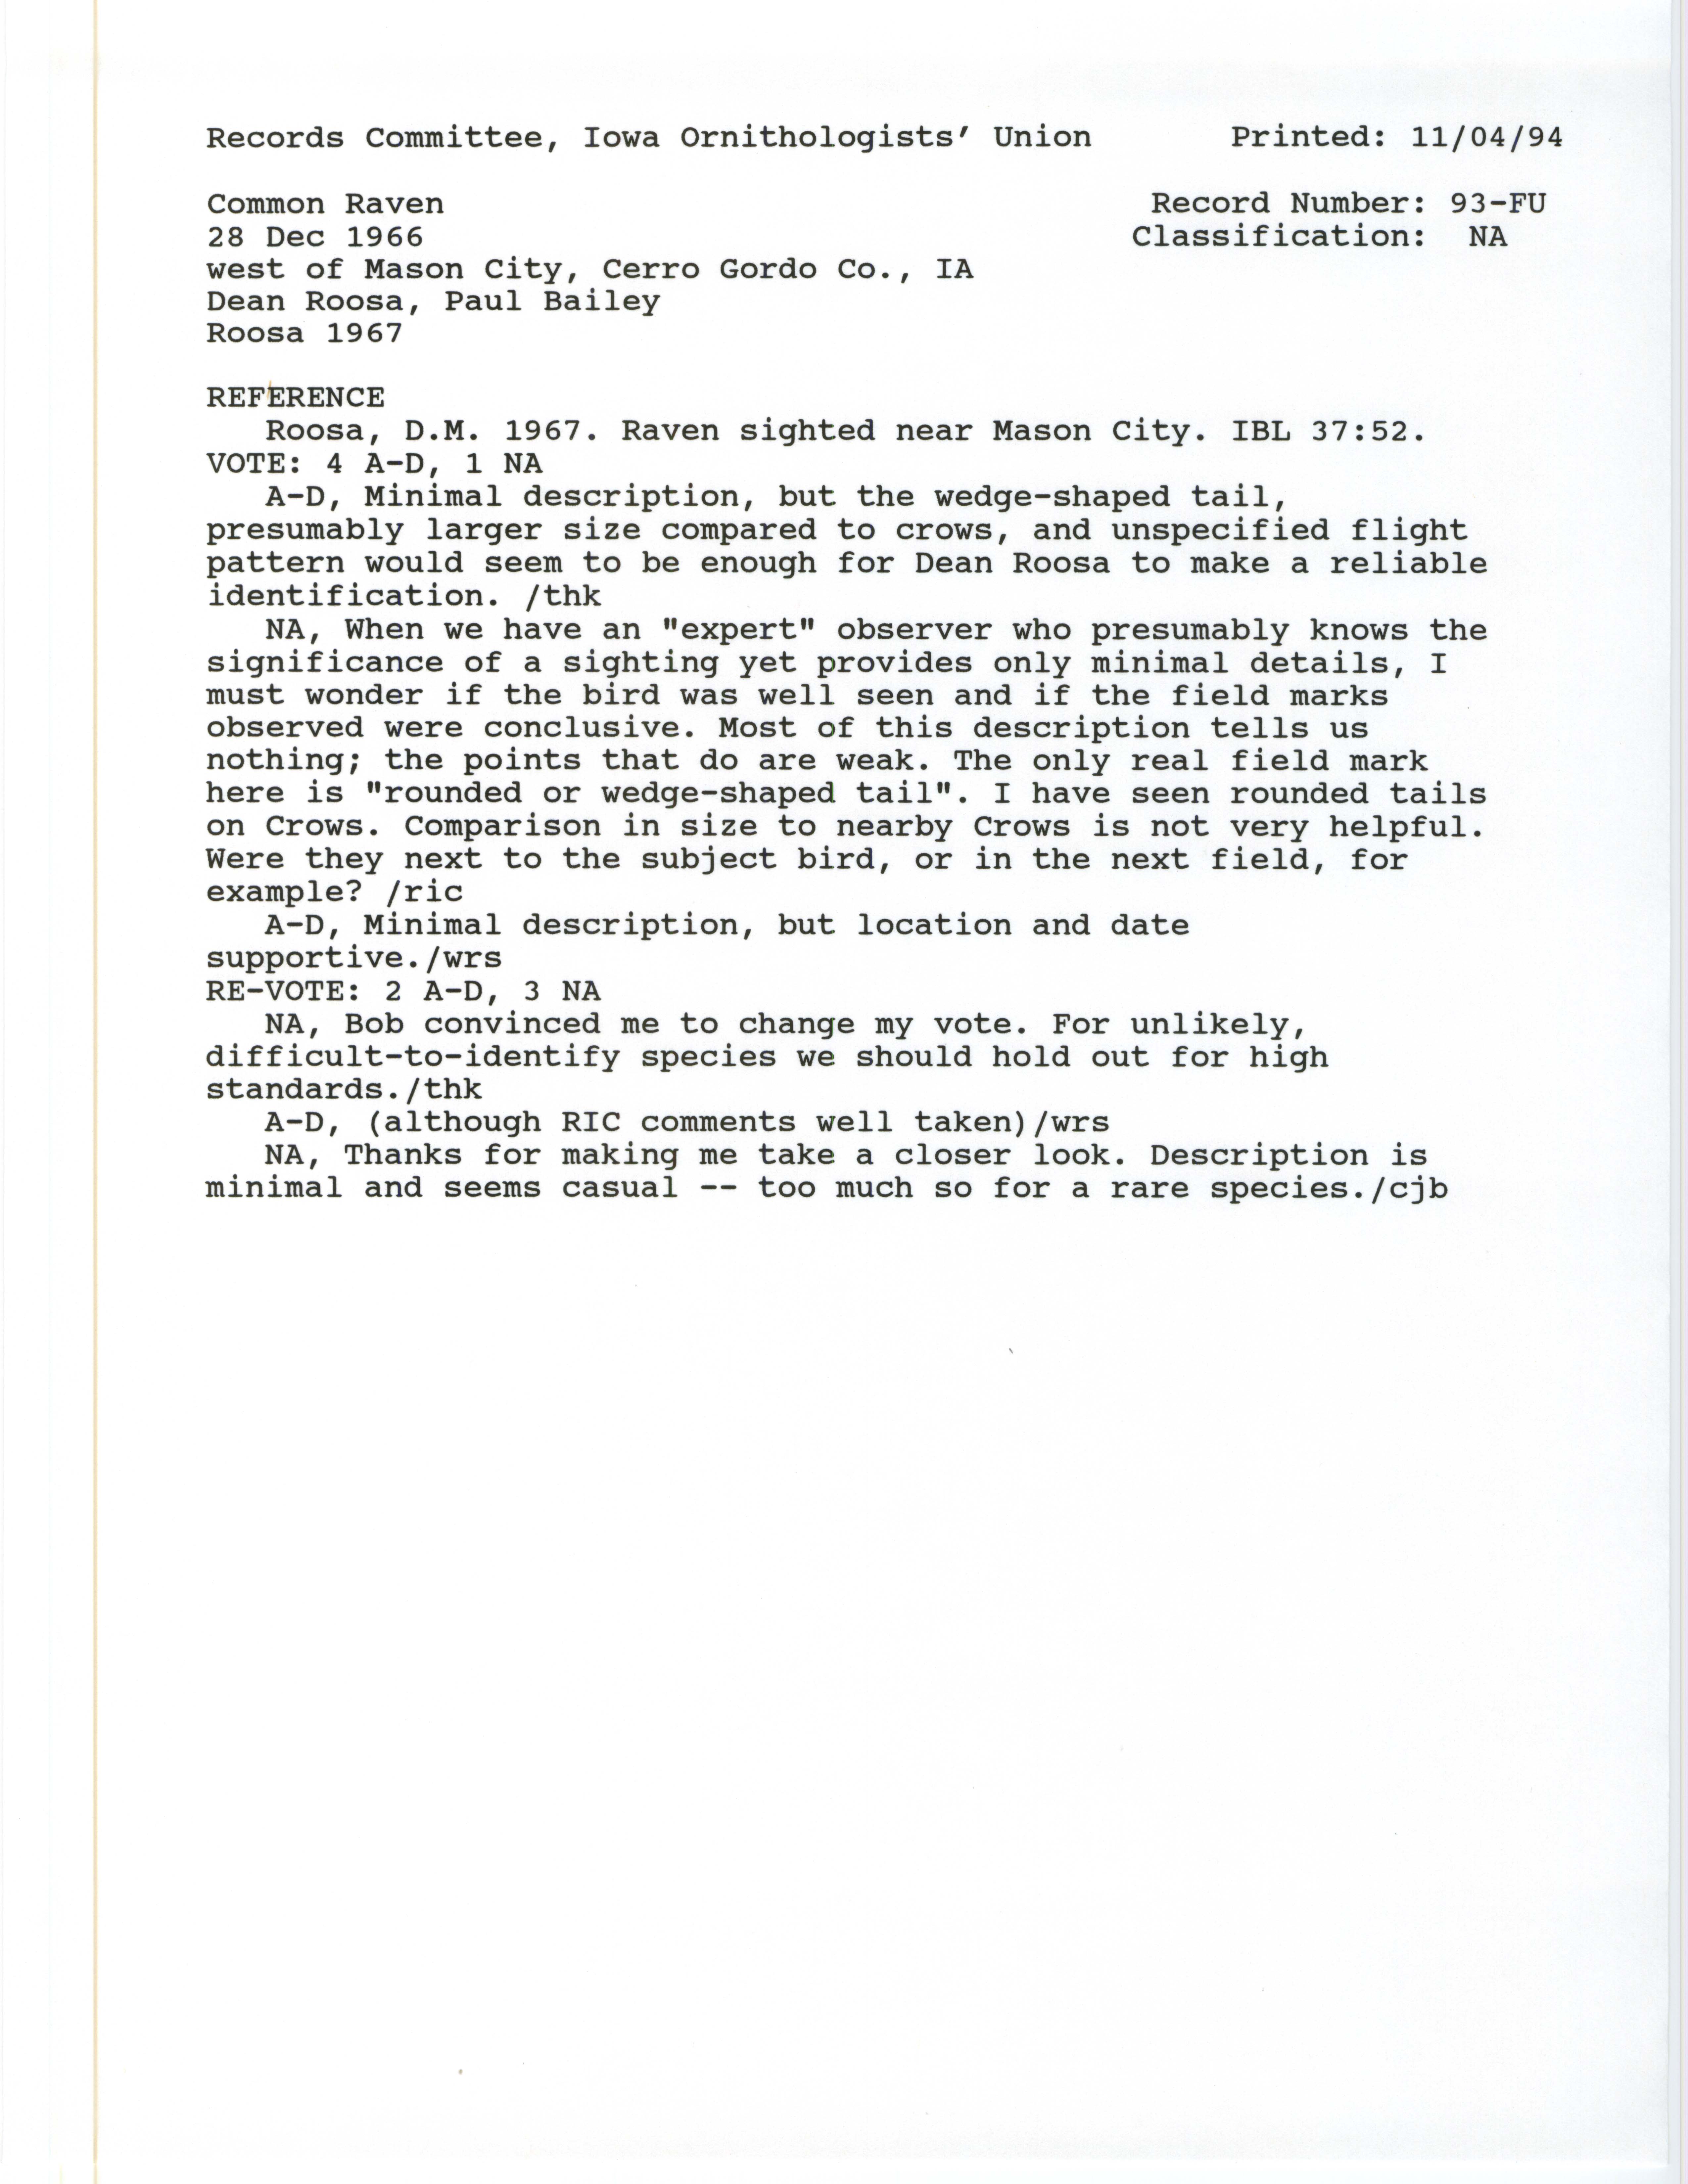 Records Committee review for rare bird sighting of Common Raven west of Mason City, 1966